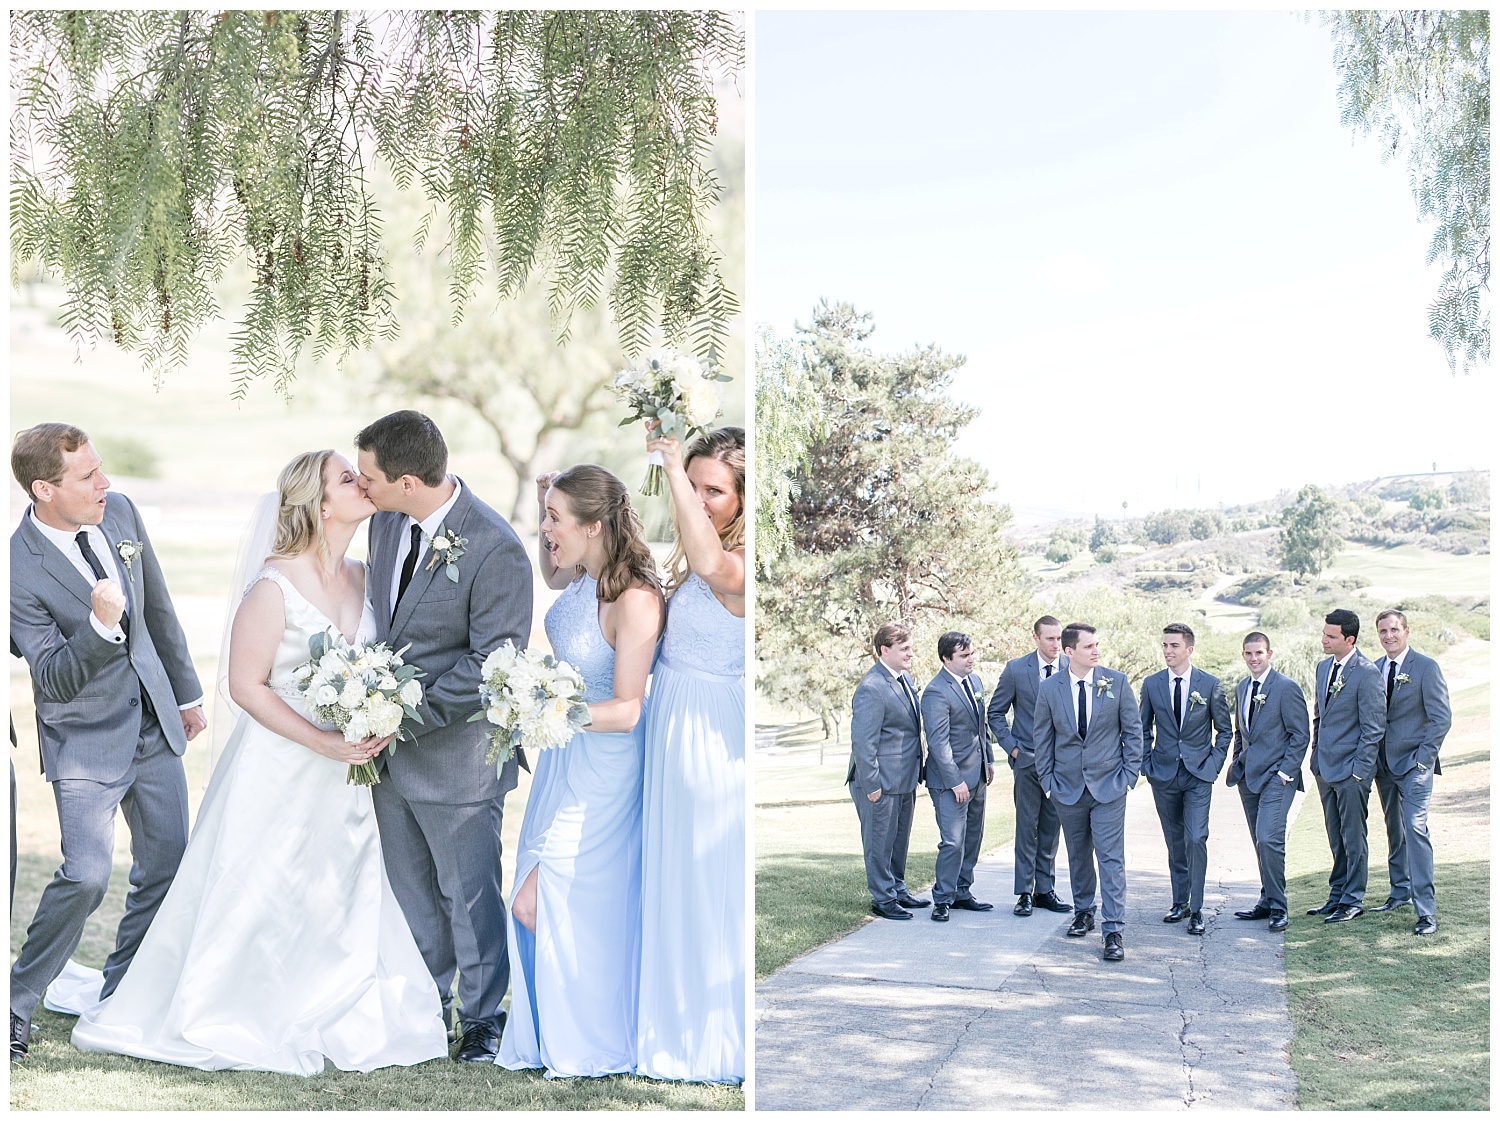 catherine + tim - bella collina golf course - san clemente california - wedding party - bride and groom couples portraits-0076